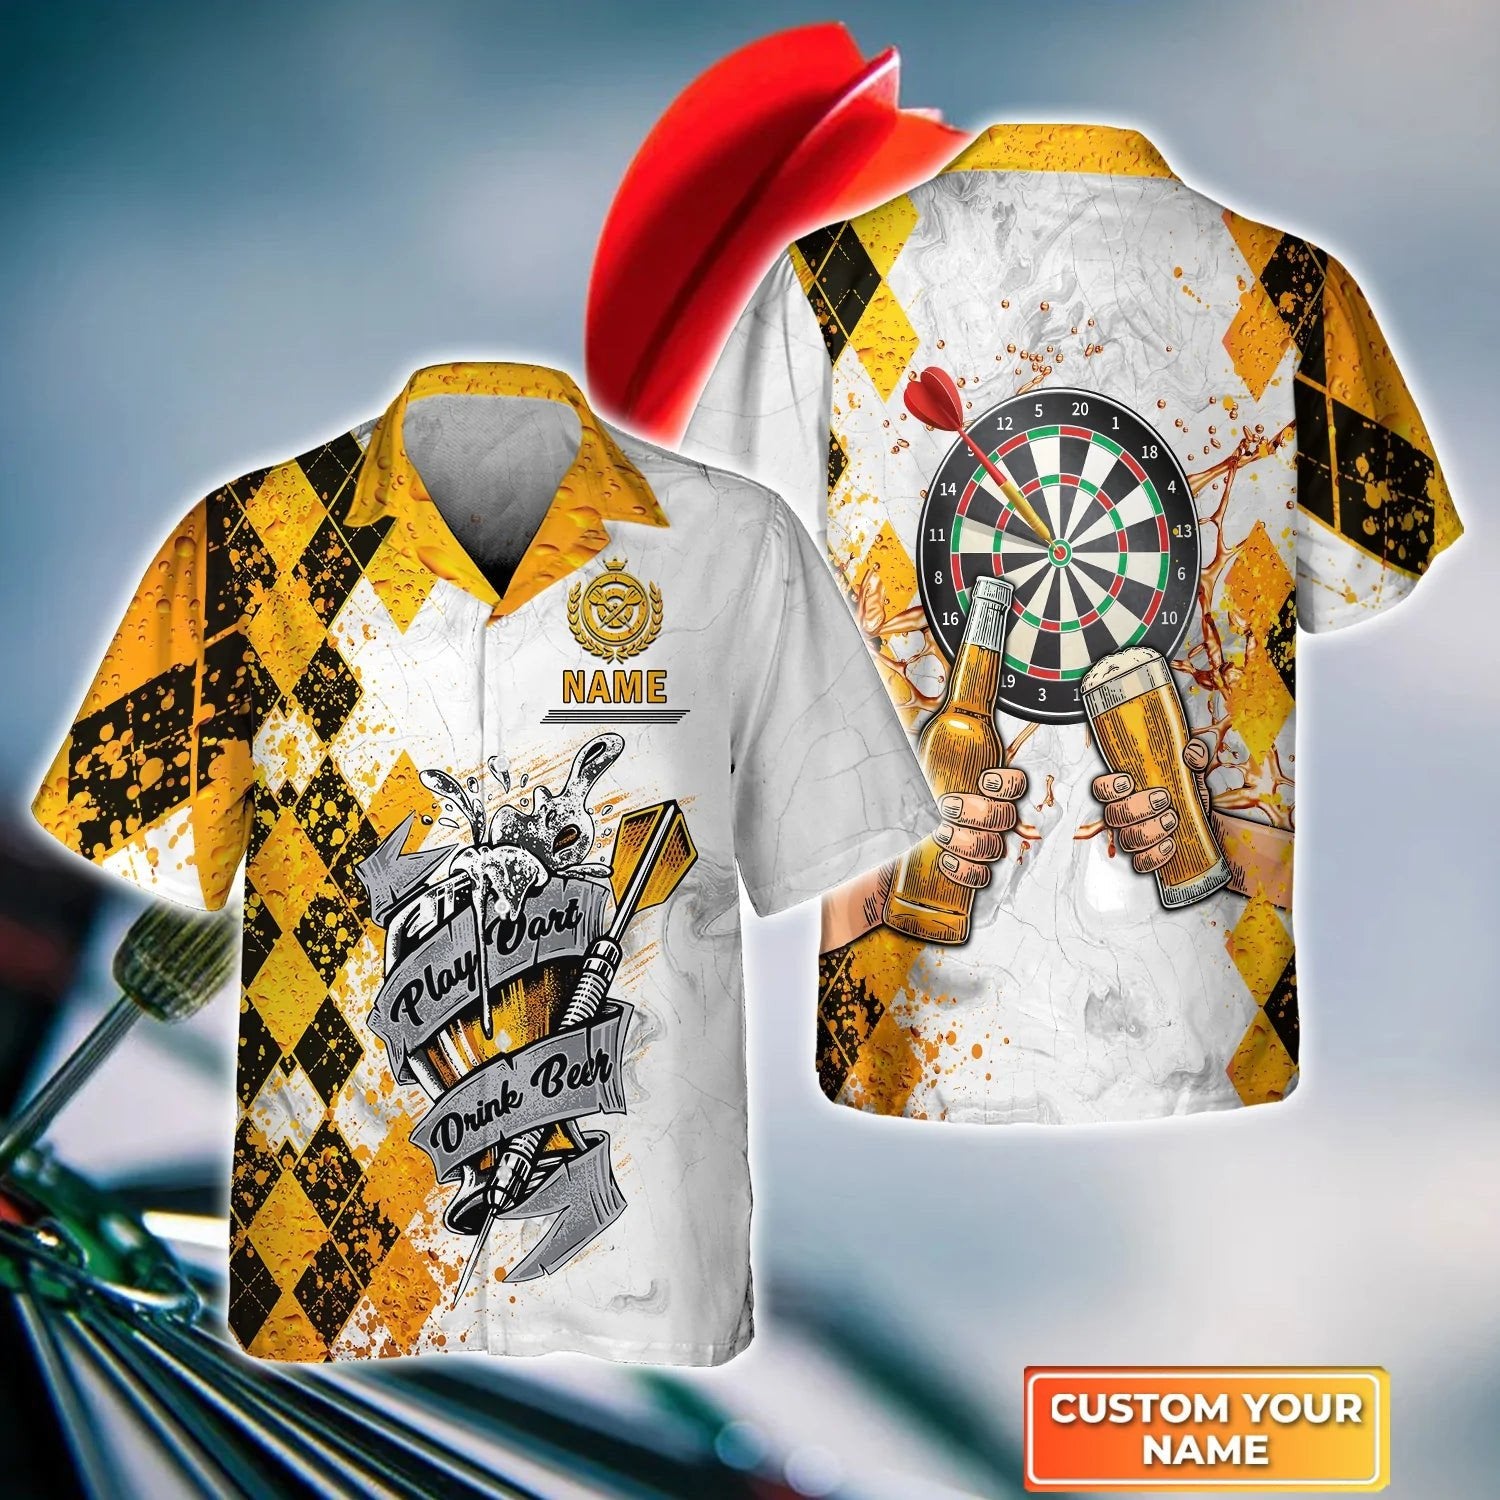 This Is My Dart Playing Trash Talking Beer Drinking Personalized Name 3D Hawaiian Shirt For Darts Player